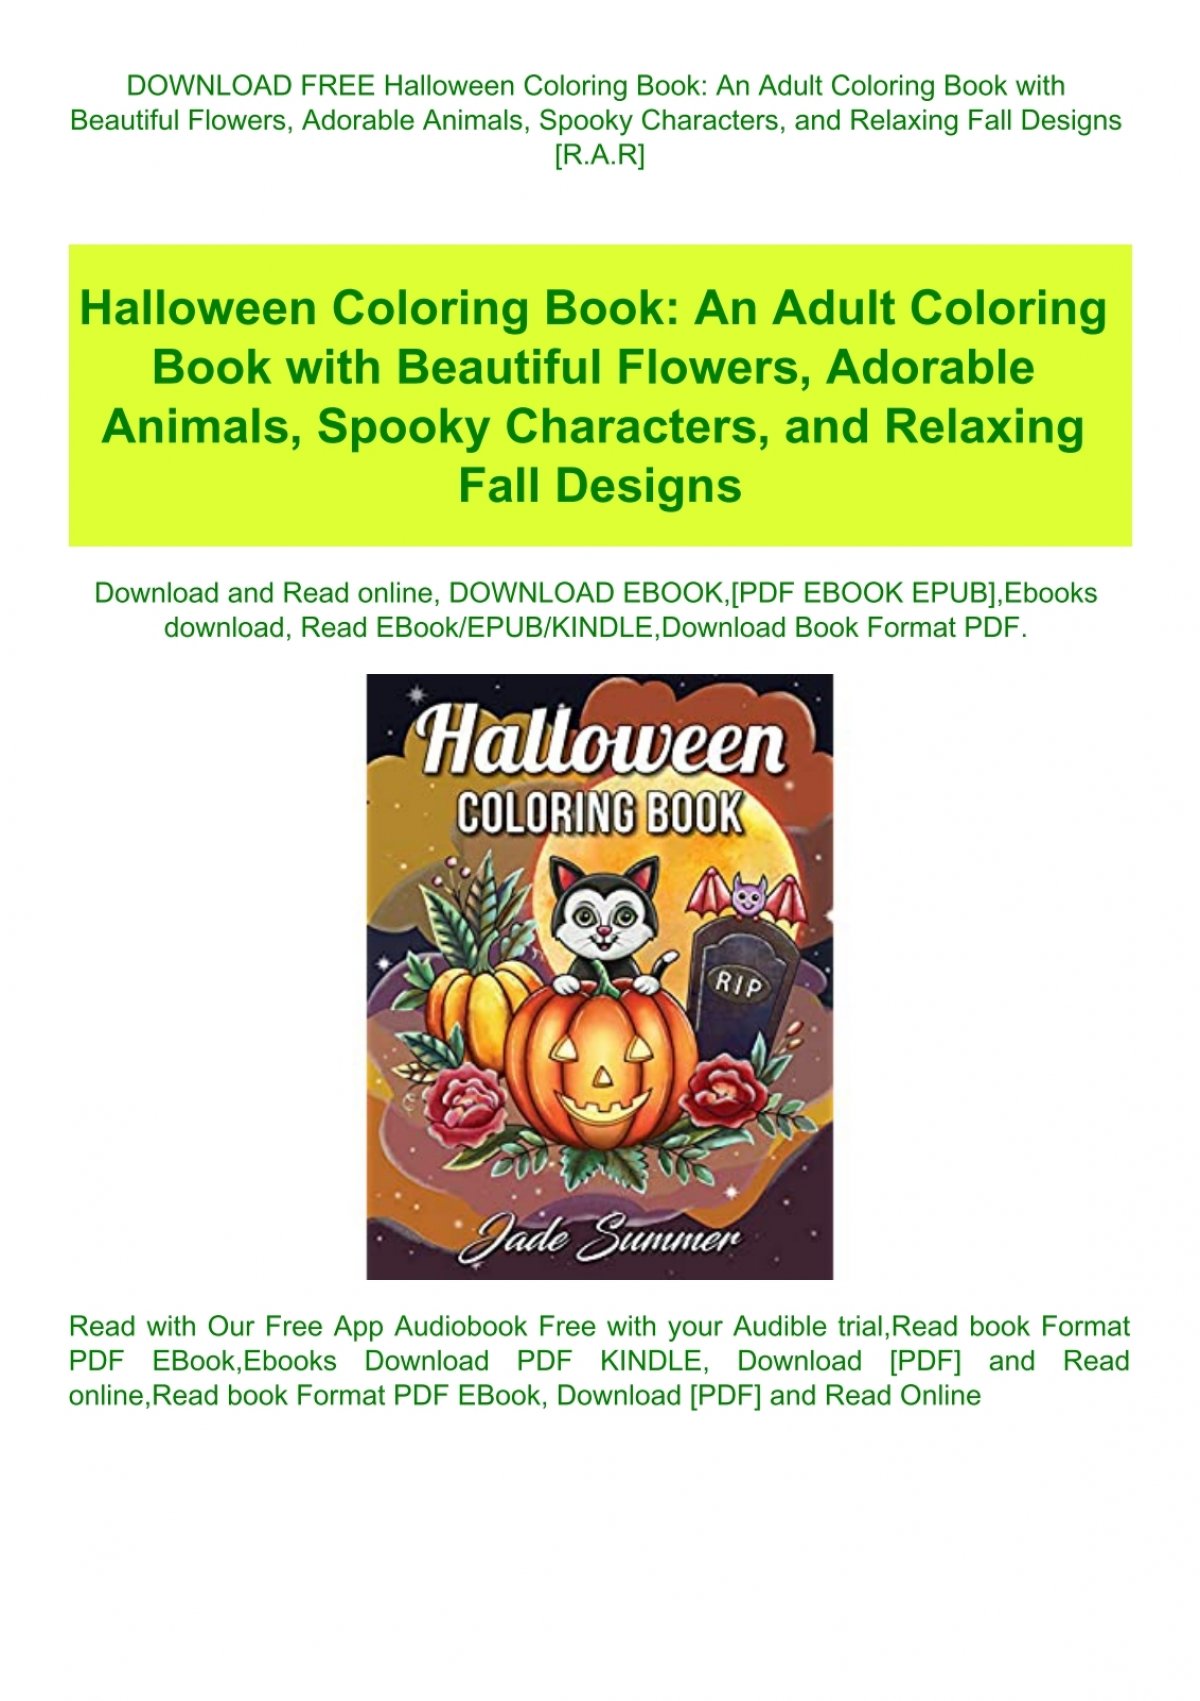 Download Download Free Halloween Coloring Book An Adult Coloring Book With Beautiful Flowers Adorable Animals Spooky Characters And Relaxing Fall Designs R A R